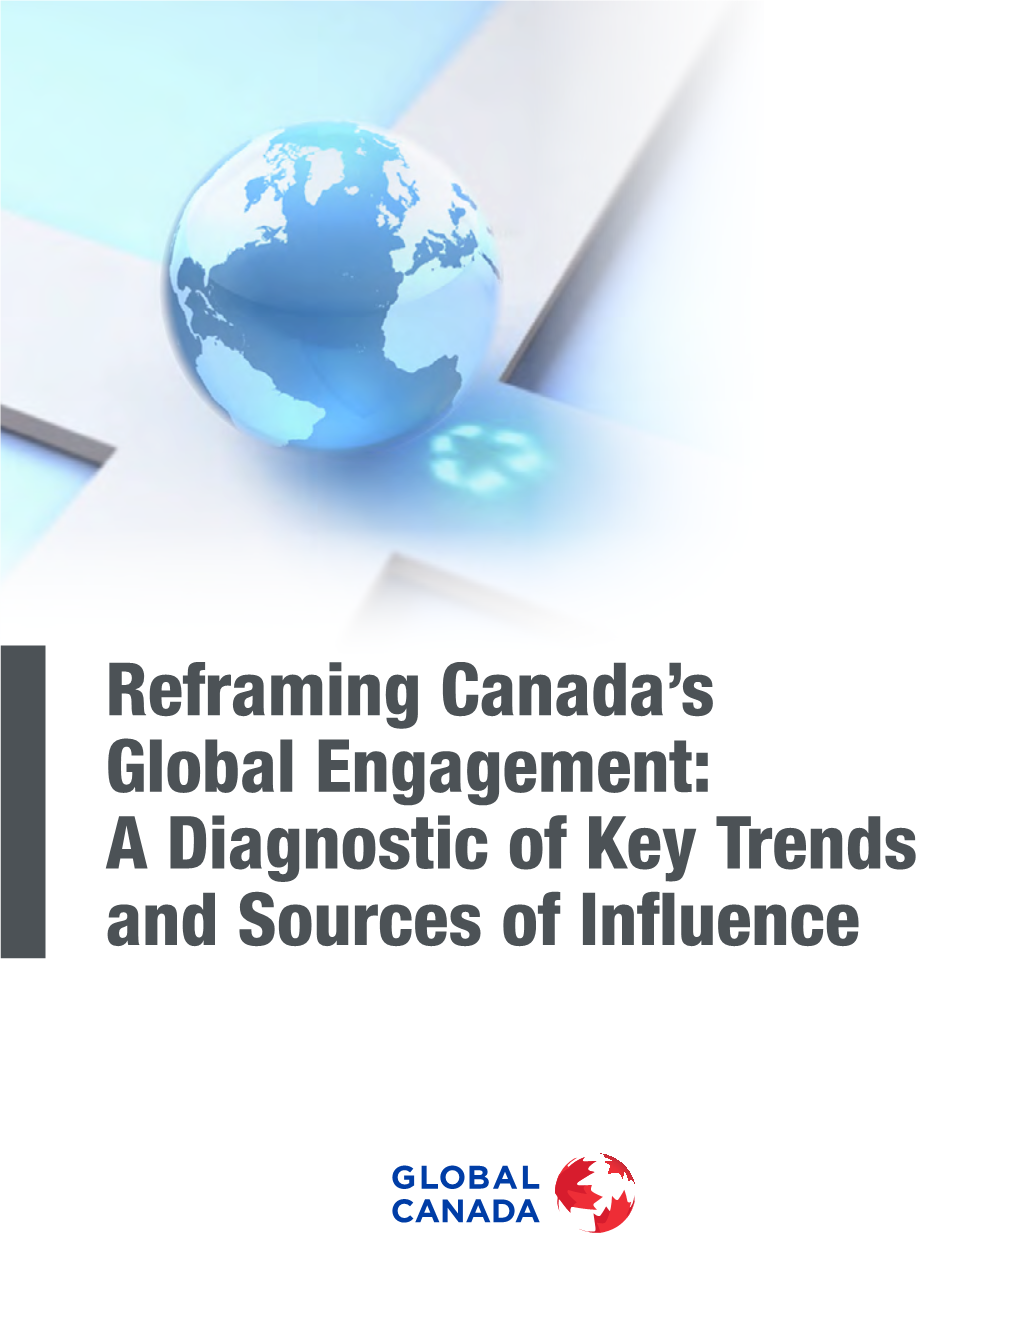 Reframing Canada's Global Engagement: a Diagnostic of Key Trends and Sources of Influence